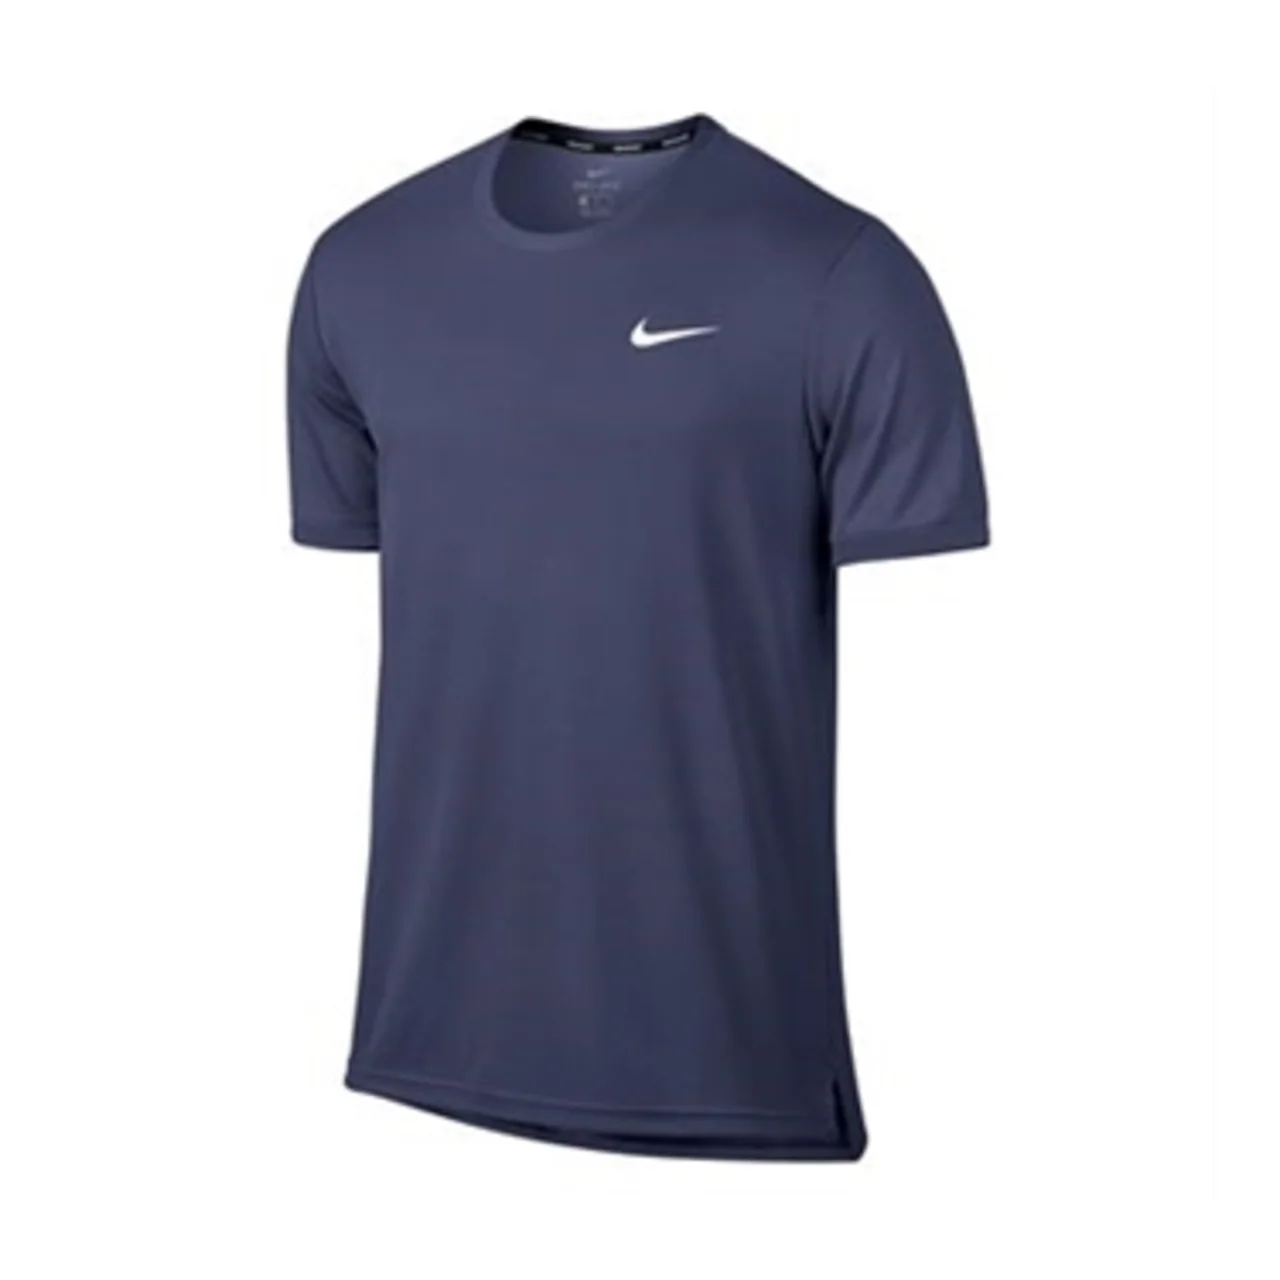 Nike Dry Top Team Blue Size S